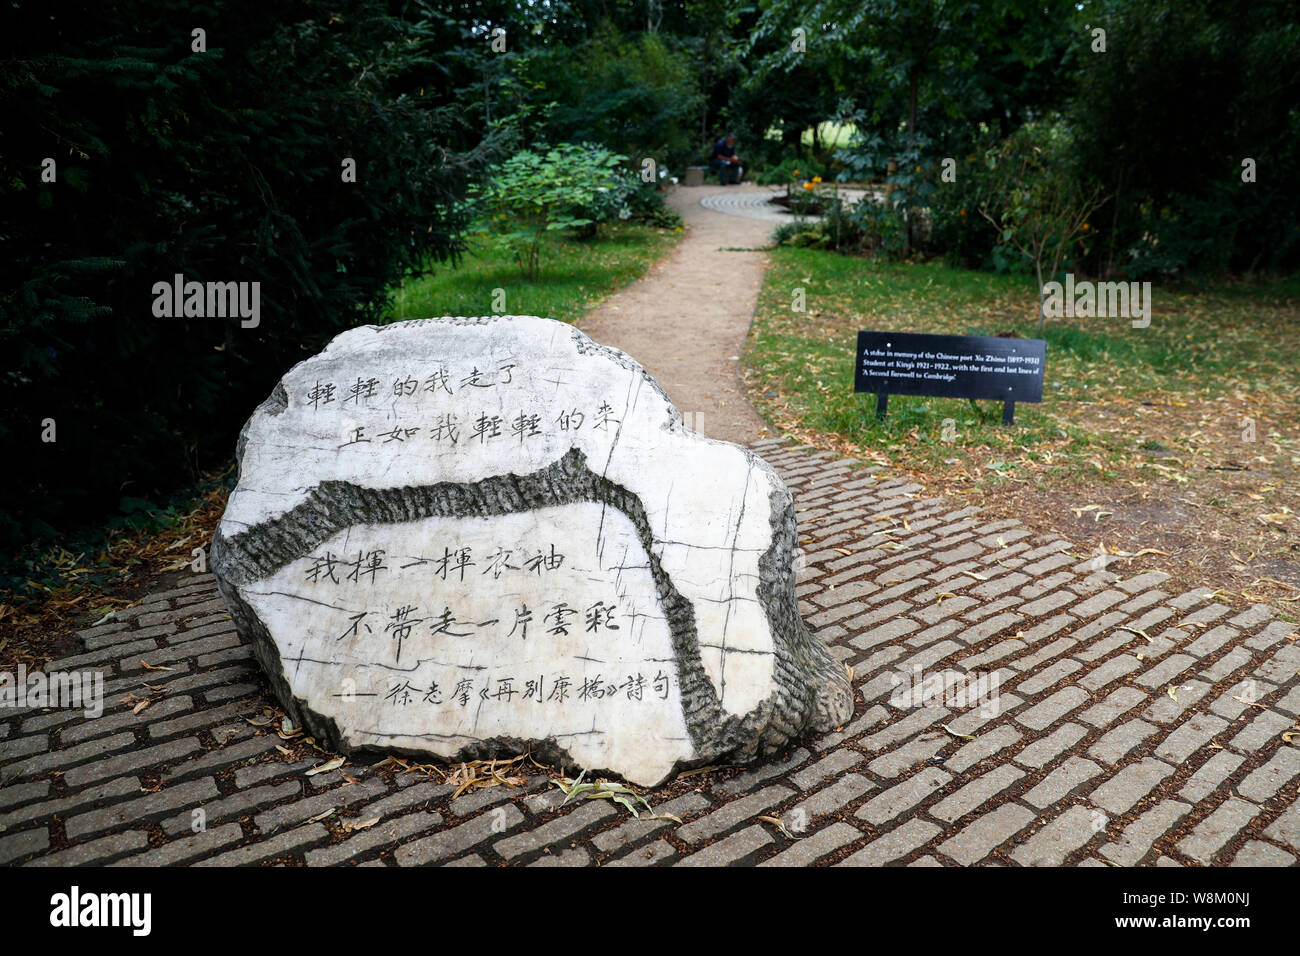 Cambridge, UK. 9th Aug, 2019. A stone in memory of the Chinese poet Xu Zhimo is photographed at the Xu Zhimo Garden in King's College during the 5th Cambridge Xu Zhimo Poetry and Art Festival 2019 in Cambridge, Britain on Aug. 9, 2019. TO GO WITH 'Feature: Xu Zhimo memorial garden opens at King's College Cambridge' Credit: Han Yan/Xinhua/Alamy Live News Stock Photo